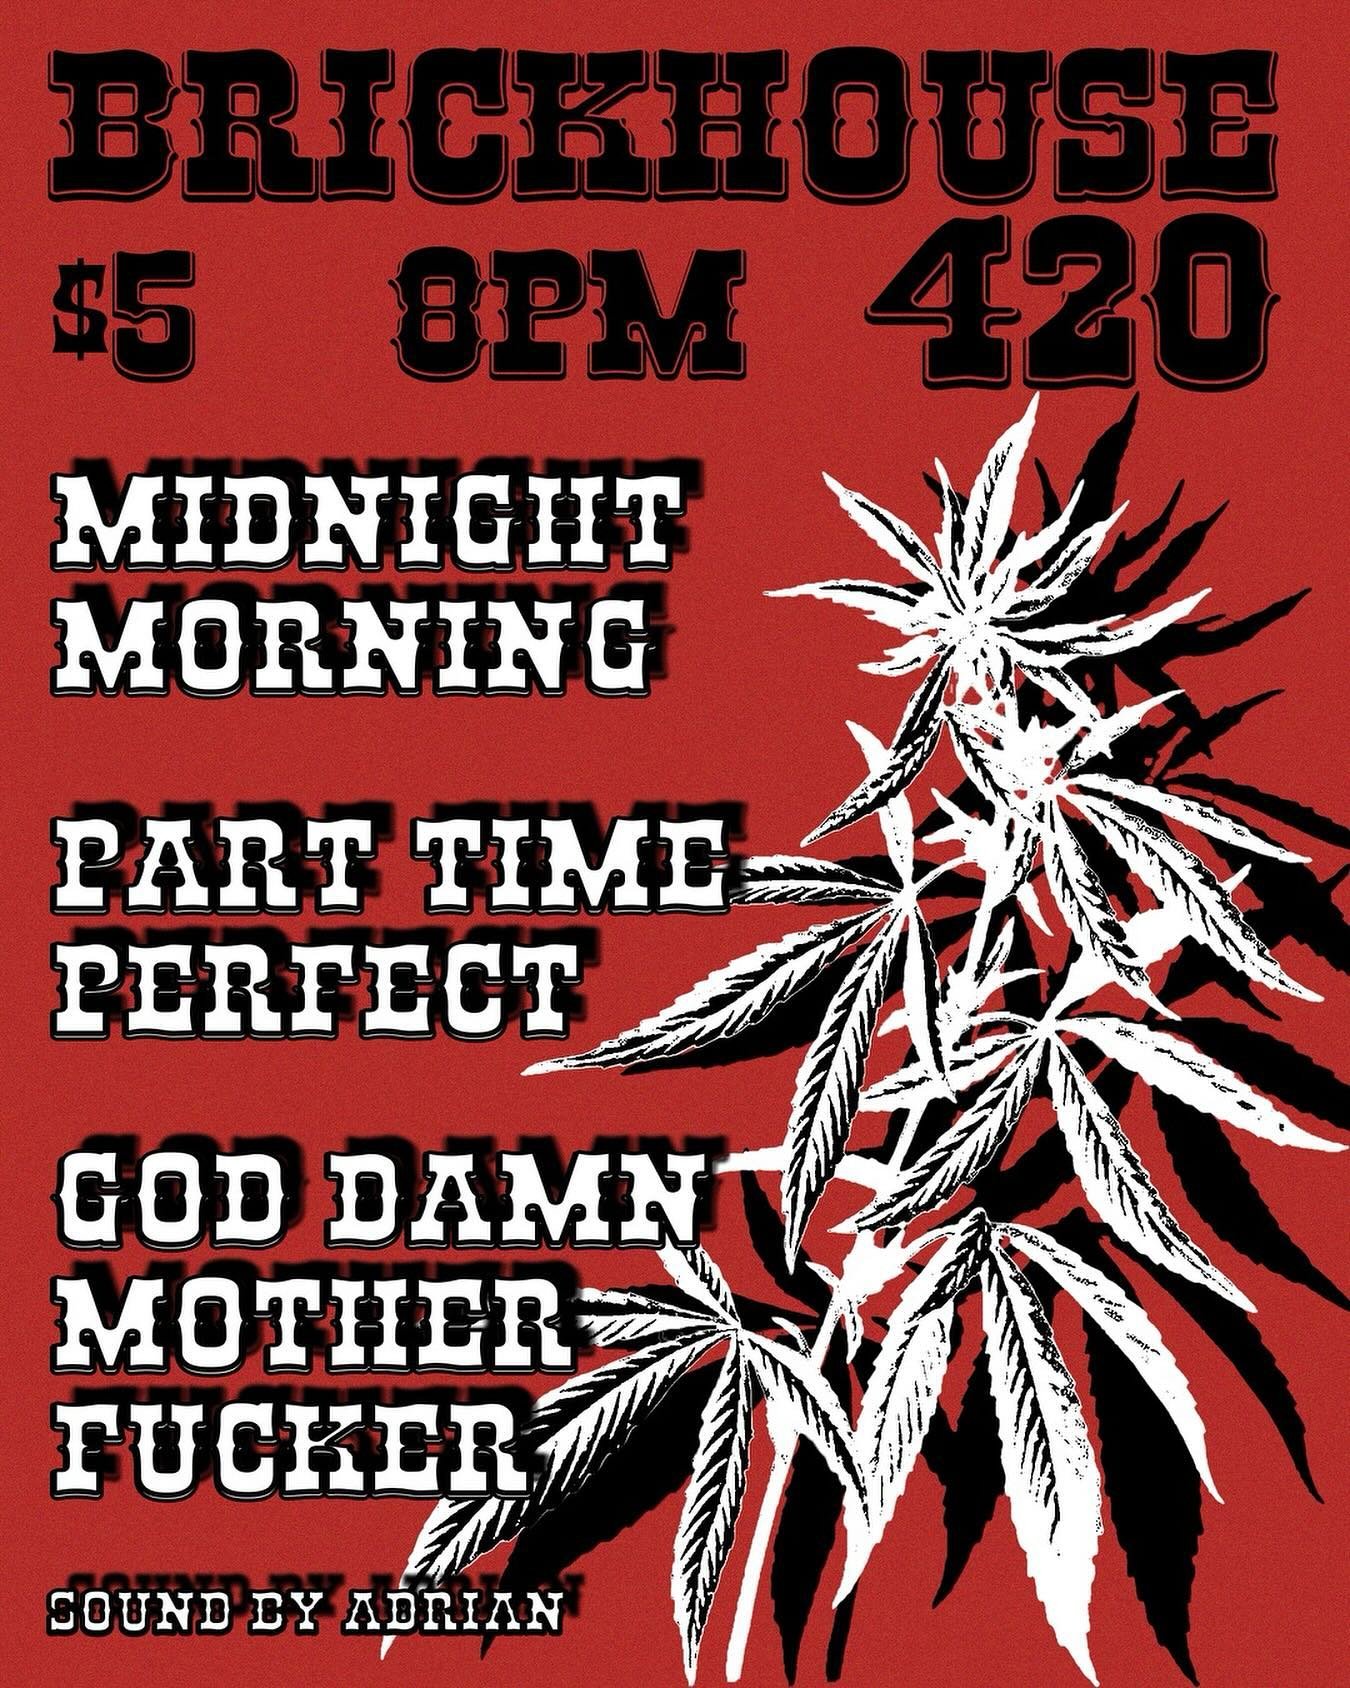 The weekend is almost upon us! Another great lineup. Friday night we goin country with @rossholler to represent. And Saturday we celebrating a day of days with the family and true brick OG&rsquo;s @midnightmorningmusic @parttimeperfect @goddamnmother